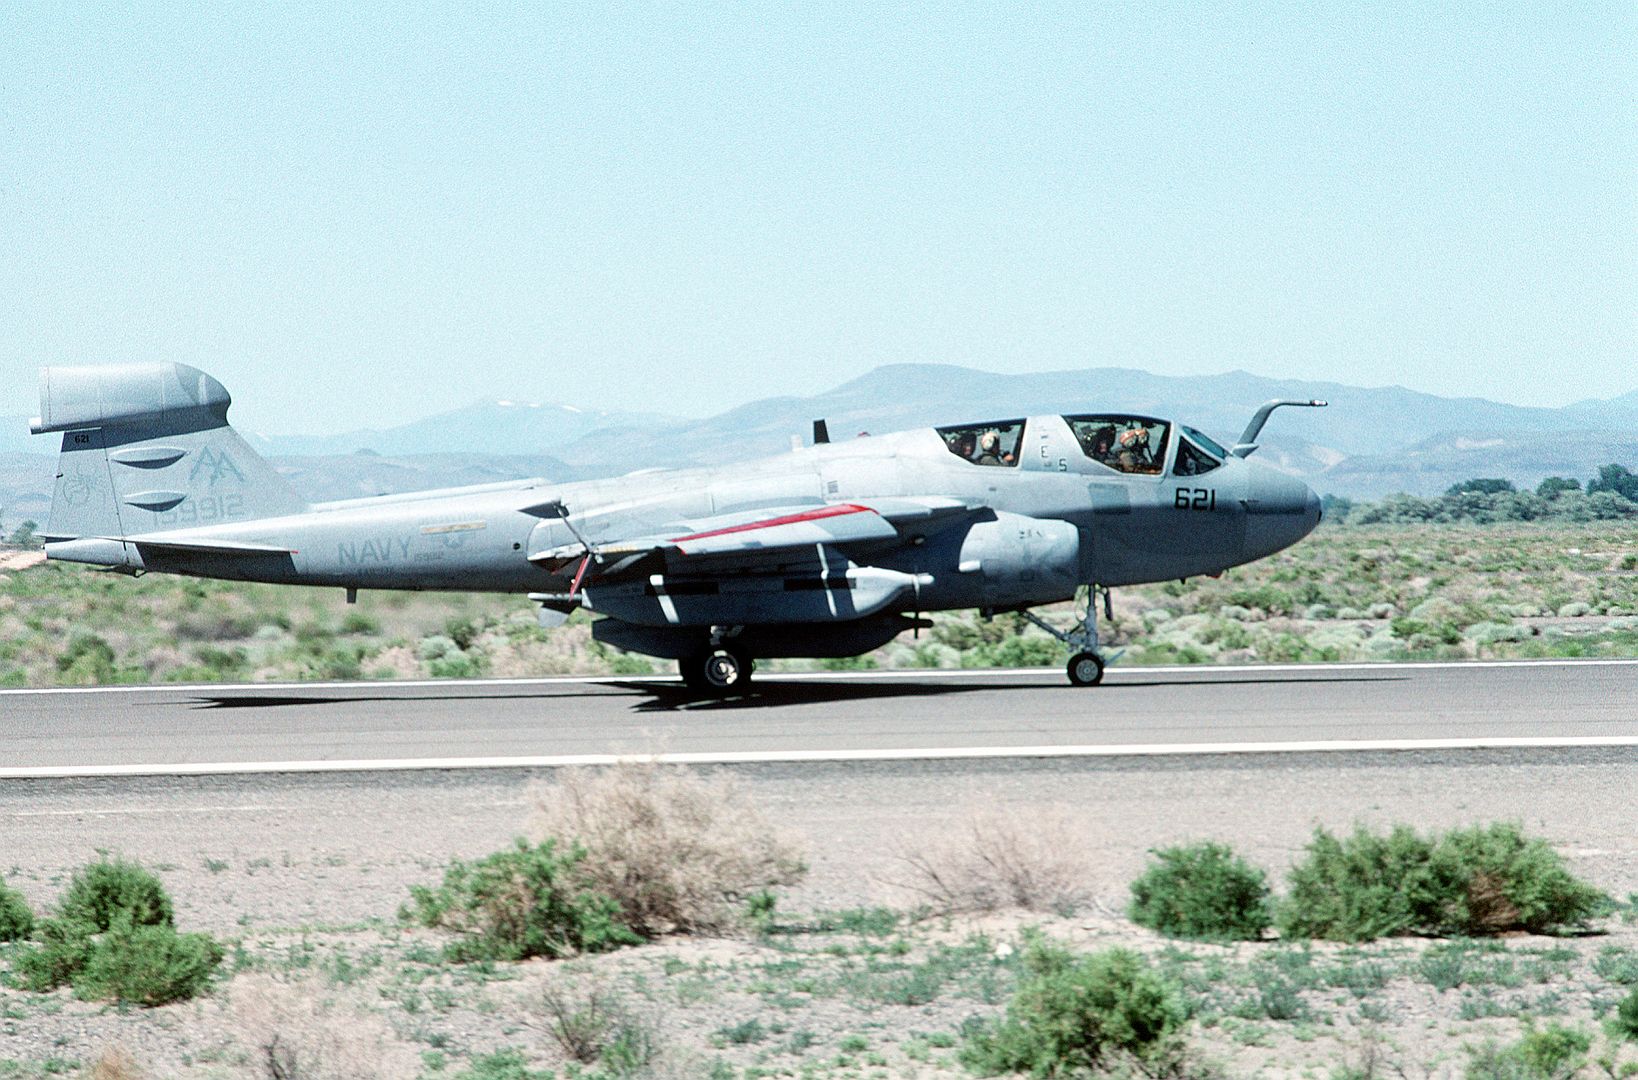 6B Prowler Aircraft Lands Following A Training Mission Against Carrier Air Wing 17 Forces